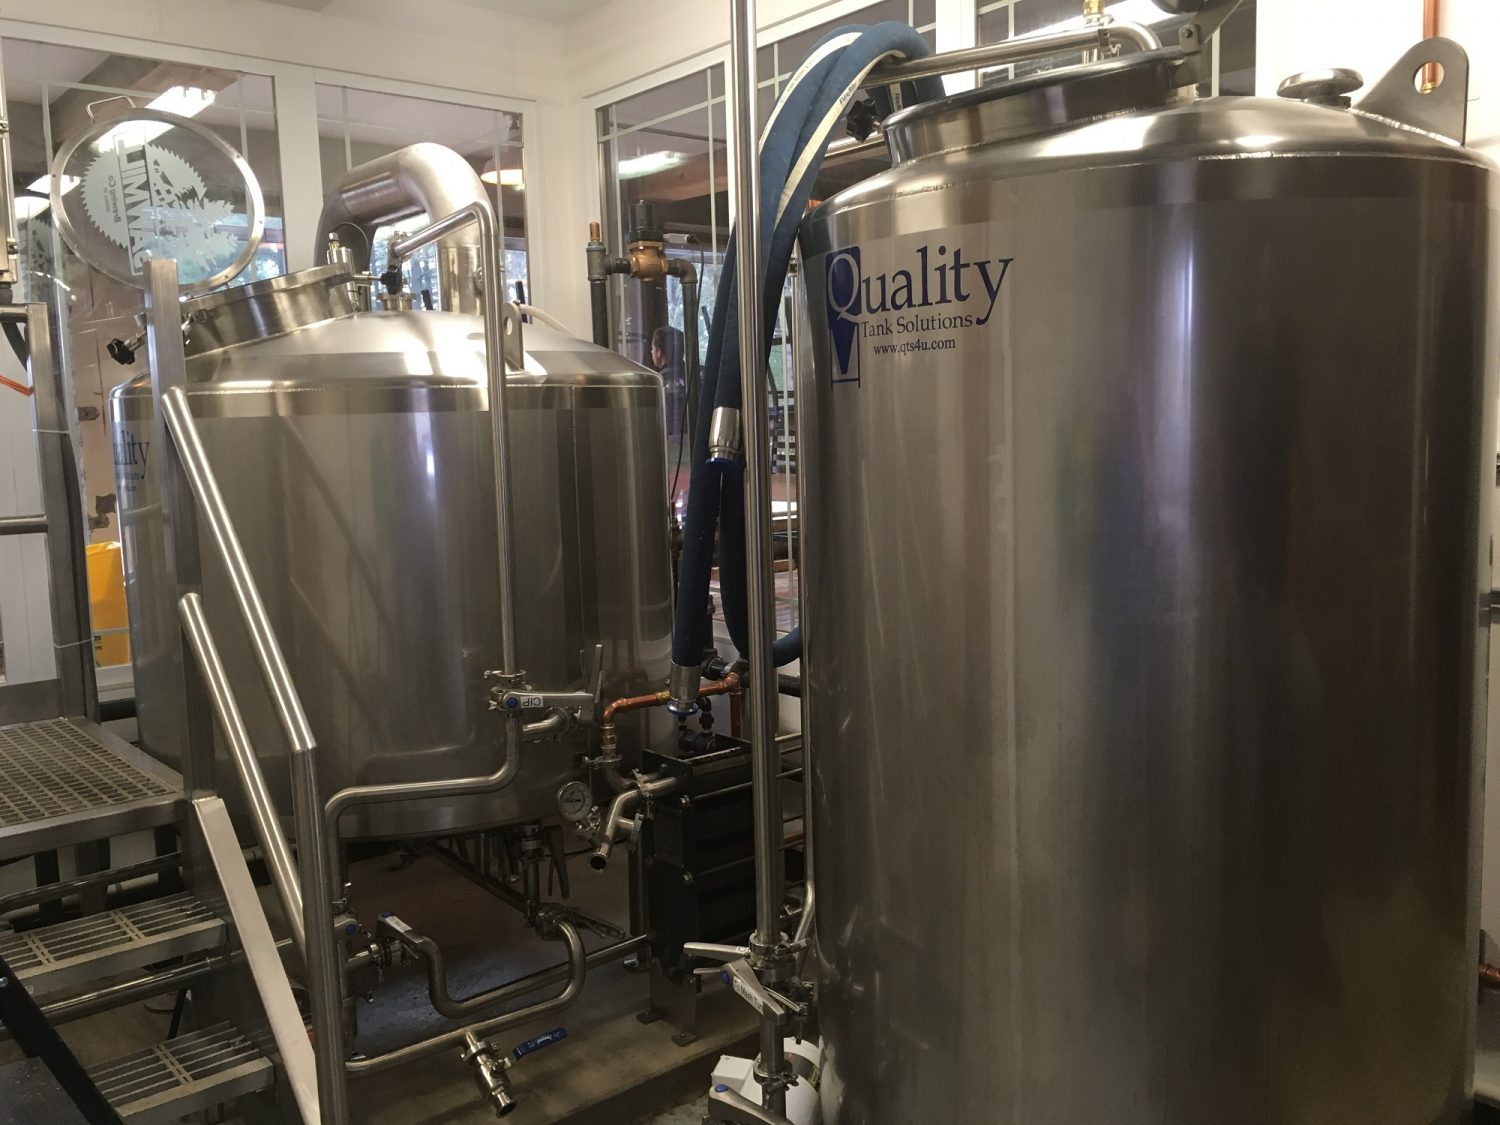 Sawmill Brewing Company showcases their homemade brewing process